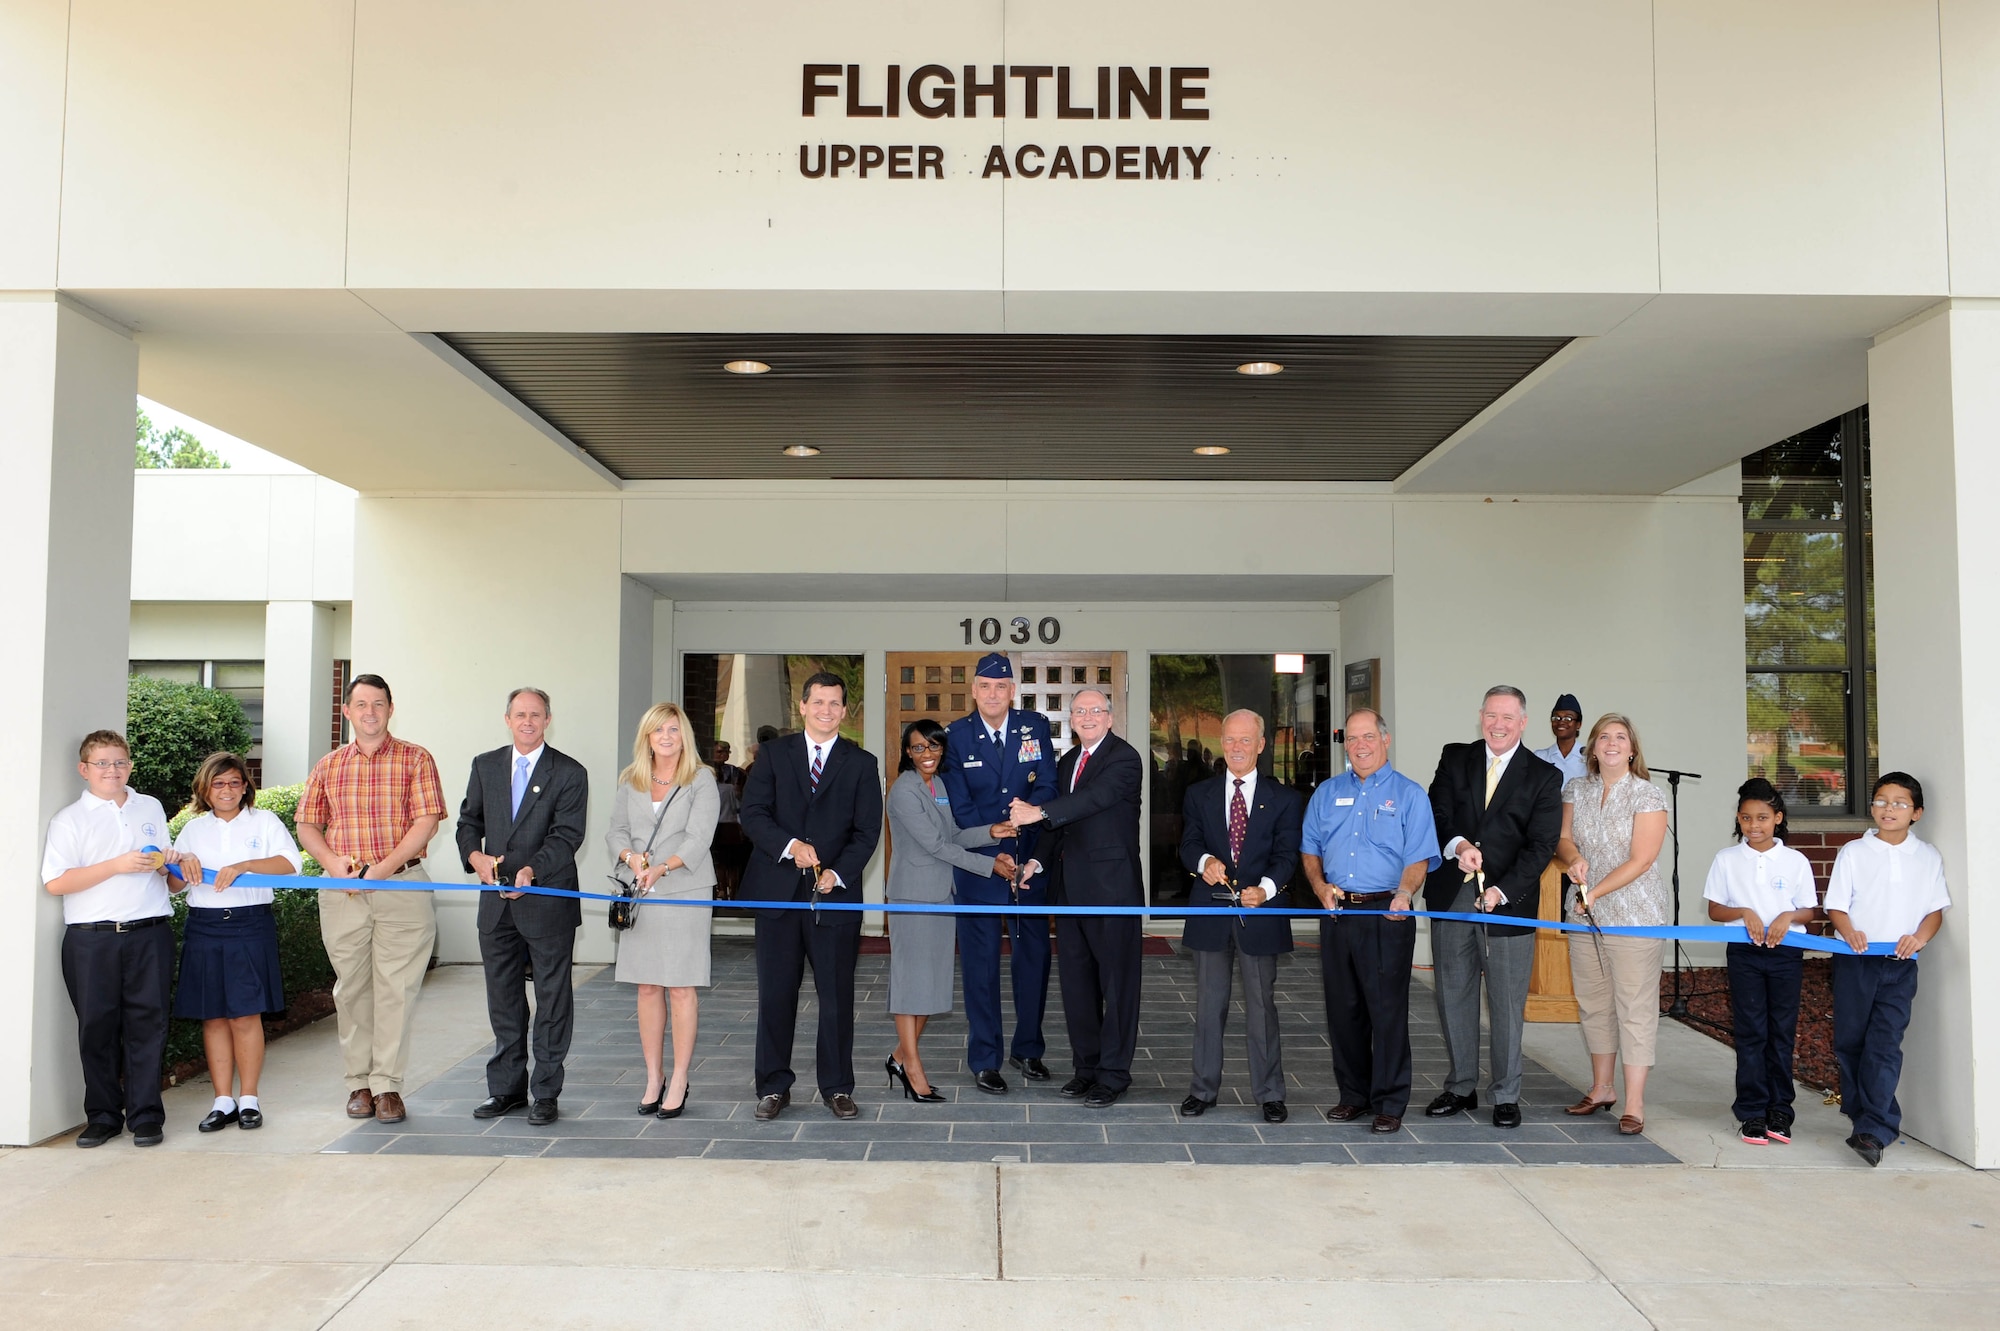 Jody Urquhart (third from left), Jacksonville Chamber of Commerce representative; Jacksonville Mayor Gary Fletcher; Mary Ann Duncan, charter school office director; Greg Ehrhardt, Hunt Development Group representative; Dr. Phillis Nichols Anderson, Southern Region vice president; Col. Mike Minihan,19th Airlift Wing commander; Mike Ronan, Lighthouse Academies president; Mike Wilson, donor and Wilson Family Foundation representative; Larry Wilson, donor and Wilson Family Foundation representative; Mike Rooan, Pinnacle representative; and Keri Urquhart, Lighthouse Academies of Arkansas board director, cut the ceremonial ribbon of the new Jacksonville Lighthouse Charter School Flightline Upper Academy with Payton Fraley, Ray Anna Jordan, Sincere Yellowbird and Monta Ehrcke on Aug. 15, 2011, at Little Rock Air Force Base, Ark. The school will provide a college preparatory education through enriched and advanced course offerings focused on the needs of low-income and transient student population, and provide a meaningful competitive choice of education opportunities for families. (U.S. Air Force photo by Staff Sgt. Jim Araos)